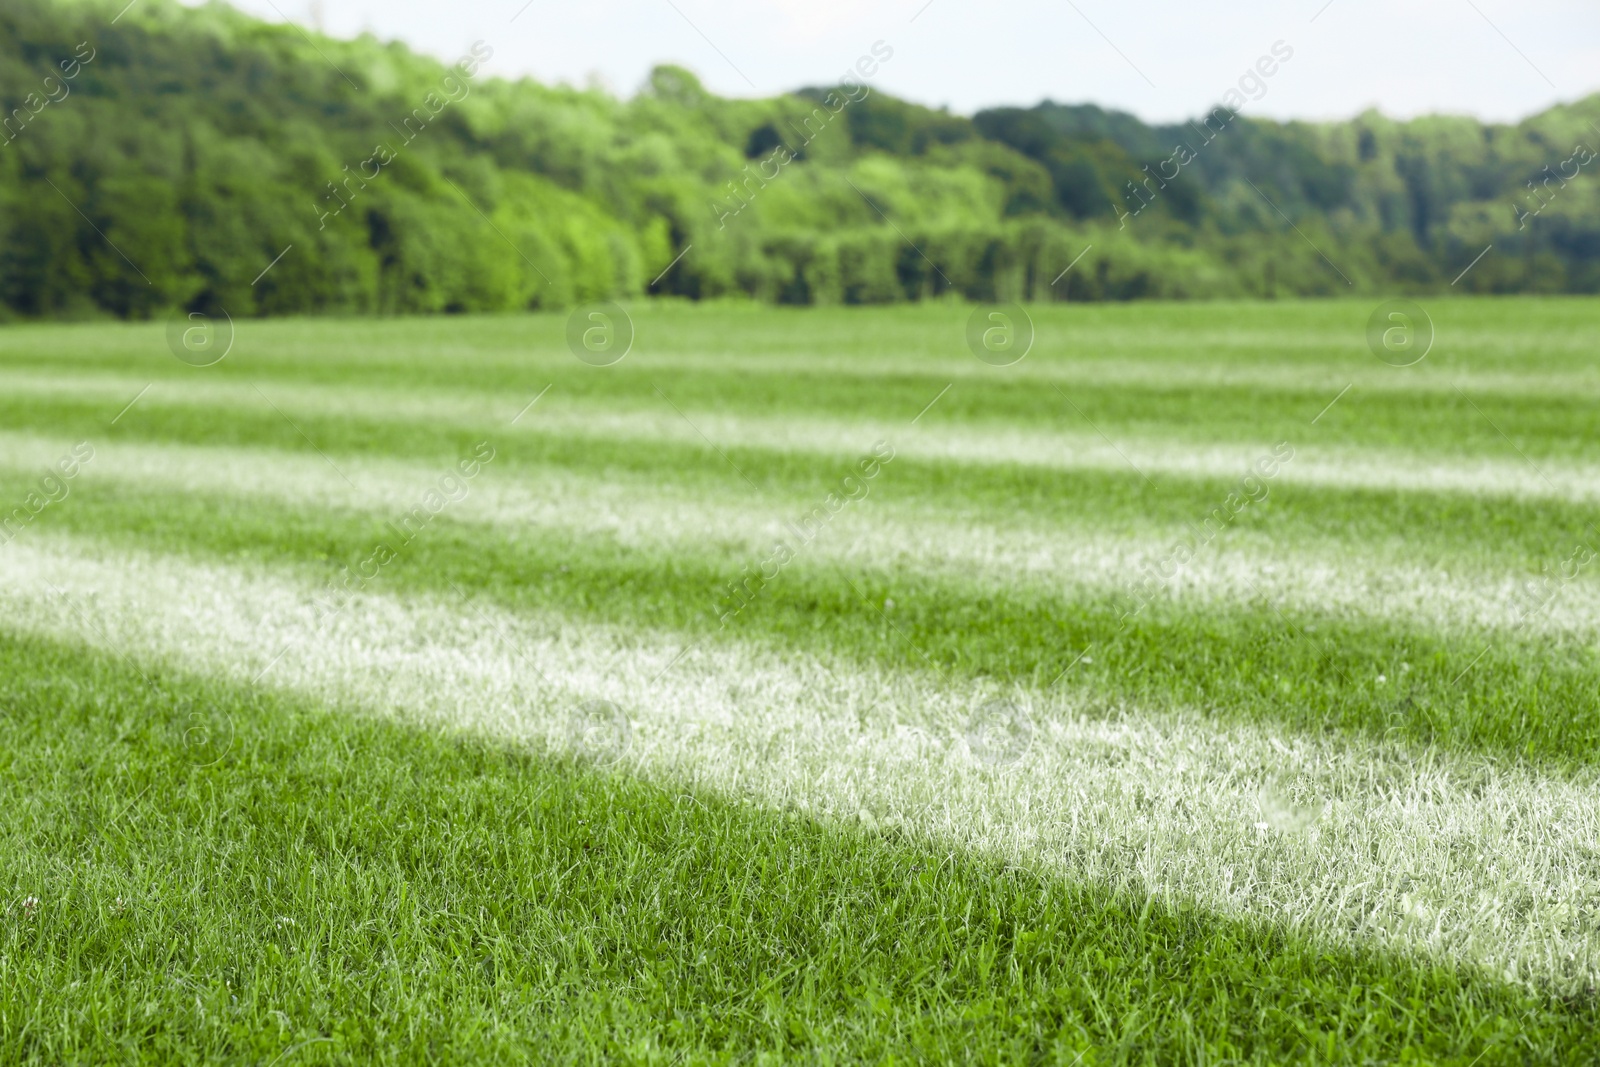 Image of Bright green grass with white markings outdoors